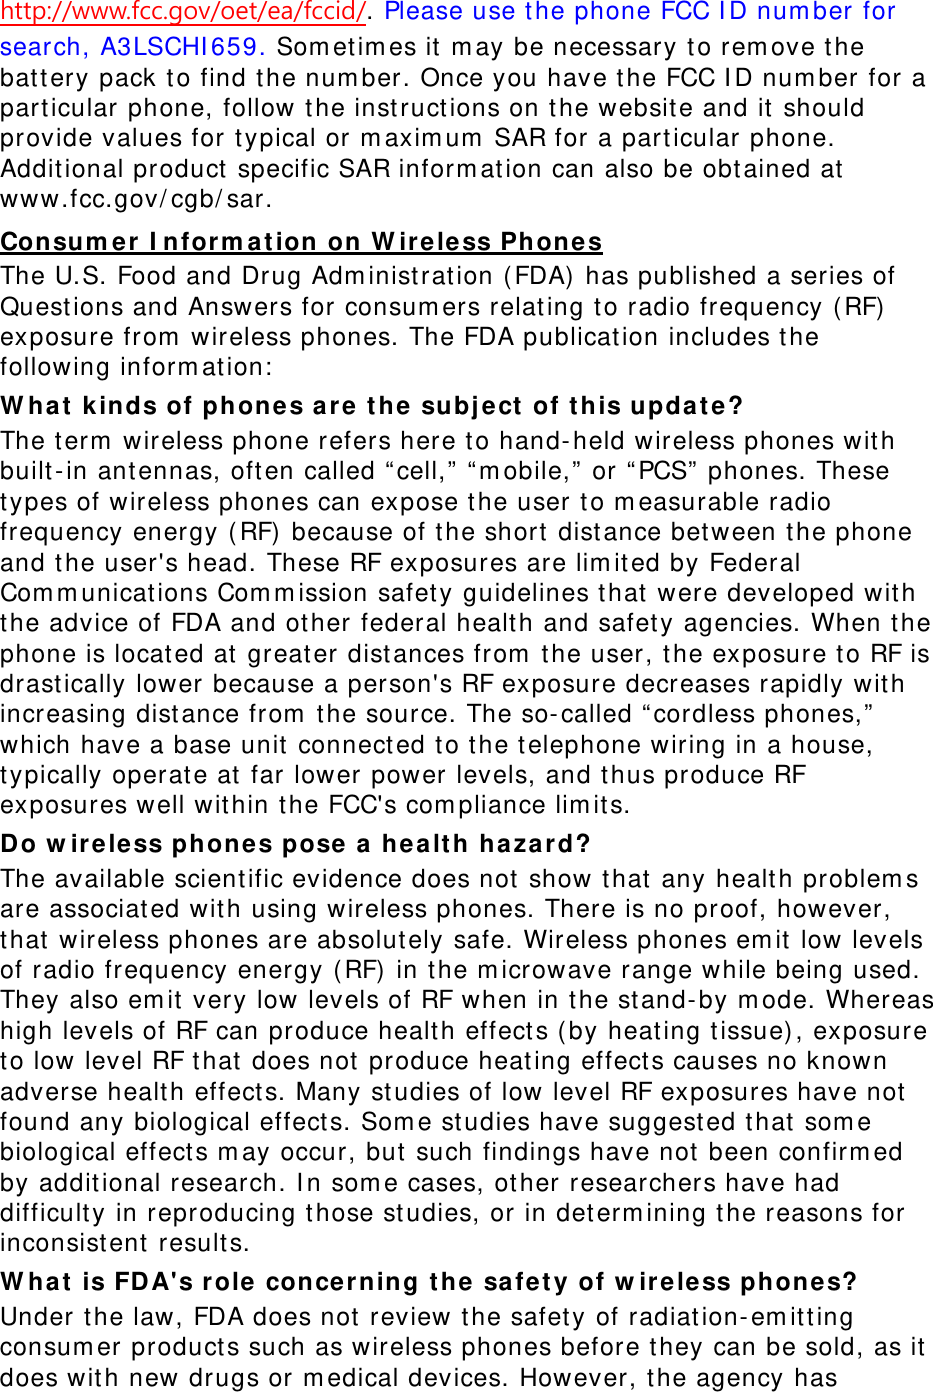 http://www.fcc.gov/oet/ea/fccid/. Please use the phone FCC ID number for search, A3LSCHI659. Sometimes it may be necessary to remove the battery pack to find the number. Once you have the FCC ID number for a particular phone, follow the instructions on the website and it should provide values for typical or maximum SAR for a particular phone. Additional product specific SAR information can also be obtained at www.fcc.gov/cgb/sar. Consumer Information on Wireless Phones The U.S. Food and Drug Administration (FDA) has published a series of Questions and Answers for consumers relating to radio frequency (RF) exposure from wireless phones. The FDA publication includes the following information: What kinds of phones are the subject of this update? The term wireless phone refers here to hand-held wireless phones with built-in antennas, often called “cell,” “mobile,” or “PCS” phones. These types of wireless phones can expose the user to measurable radio frequency energy (RF) because of the short distance between the phone and the user&apos;s head. These RF exposures are limited by Federal Communications Commission safety guidelines that were developed with the advice of FDA and other federal health and safety agencies. When the phone is located at greater distances from the user, the exposure to RF is drastically lower because a person&apos;s RF exposure decreases rapidly with increasing distance from the source. The so-called “cordless phones,” which have a base unit connected to the telephone wiring in a house, typically operate at far lower power levels, and thus produce RF exposures well within the FCC&apos;s compliance limits. Do wireless phones pose a health hazard? The available scientific evidence does not show that any health problems are associated with using wireless phones. There is no proof, however, that wireless phones are absolutely safe. Wireless phones emit low levels of radio frequency energy (RF) in the microwave range while being used. They also emit very low levels of RF when in the stand-by mode. Whereas high levels of RF can produce health effects (by heating tissue), exposure to low level RF that does not produce heating effects causes no known adverse health effects. Many studies of low level RF exposures have not found any biological effects. Some studies have suggested that some biological effects may occur, but such findings have not been confirmed by additional research. In some cases, other researchers have had difficulty in reproducing those studies, or in determining the reasons for inconsistent results. What is FDA&apos;s role concerning the safety of wireless phones? Under the law, FDA does not review the safety of radiation-emitting consumer products such as wireless phones before they can be sold, as it does with new drugs or medical devices. However, the agency has 